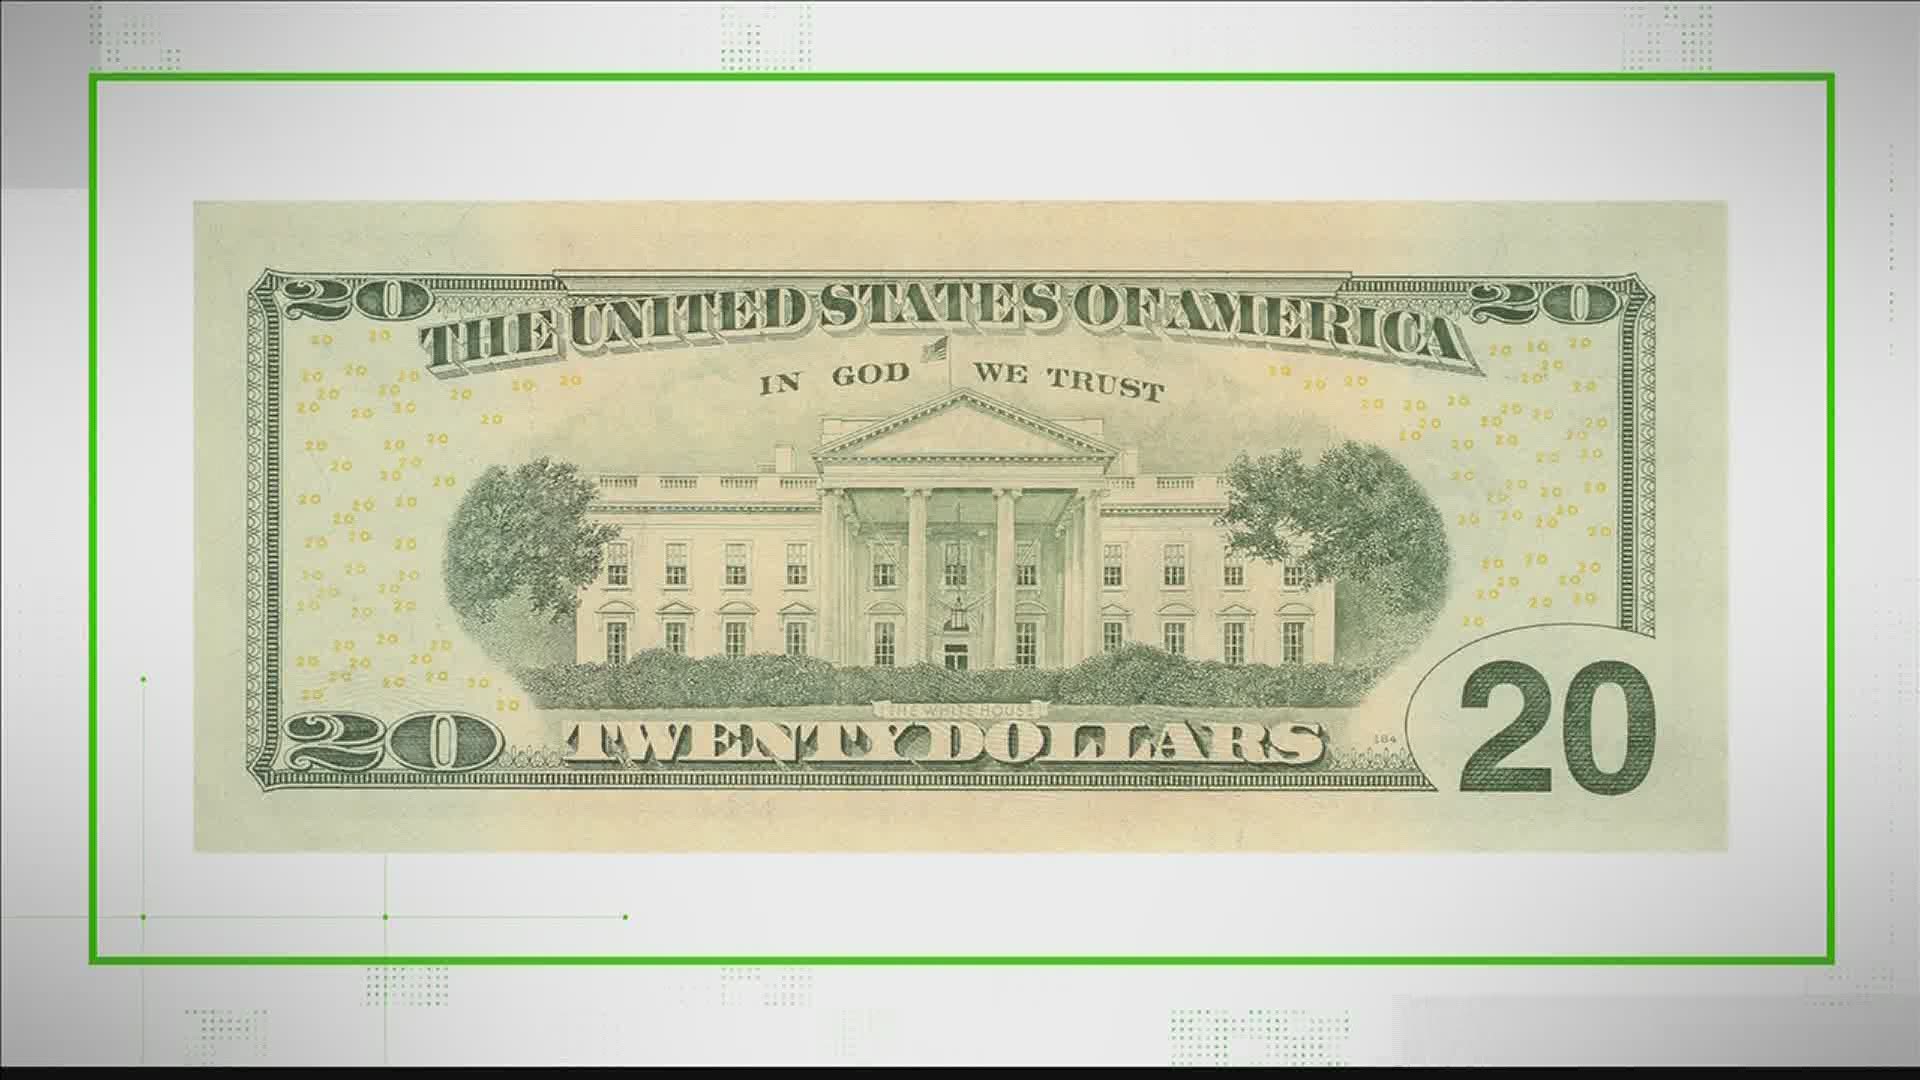 A social media post claimed the $20 bill has a hanged man in a photo in front of the White House, but it's actually something very different.